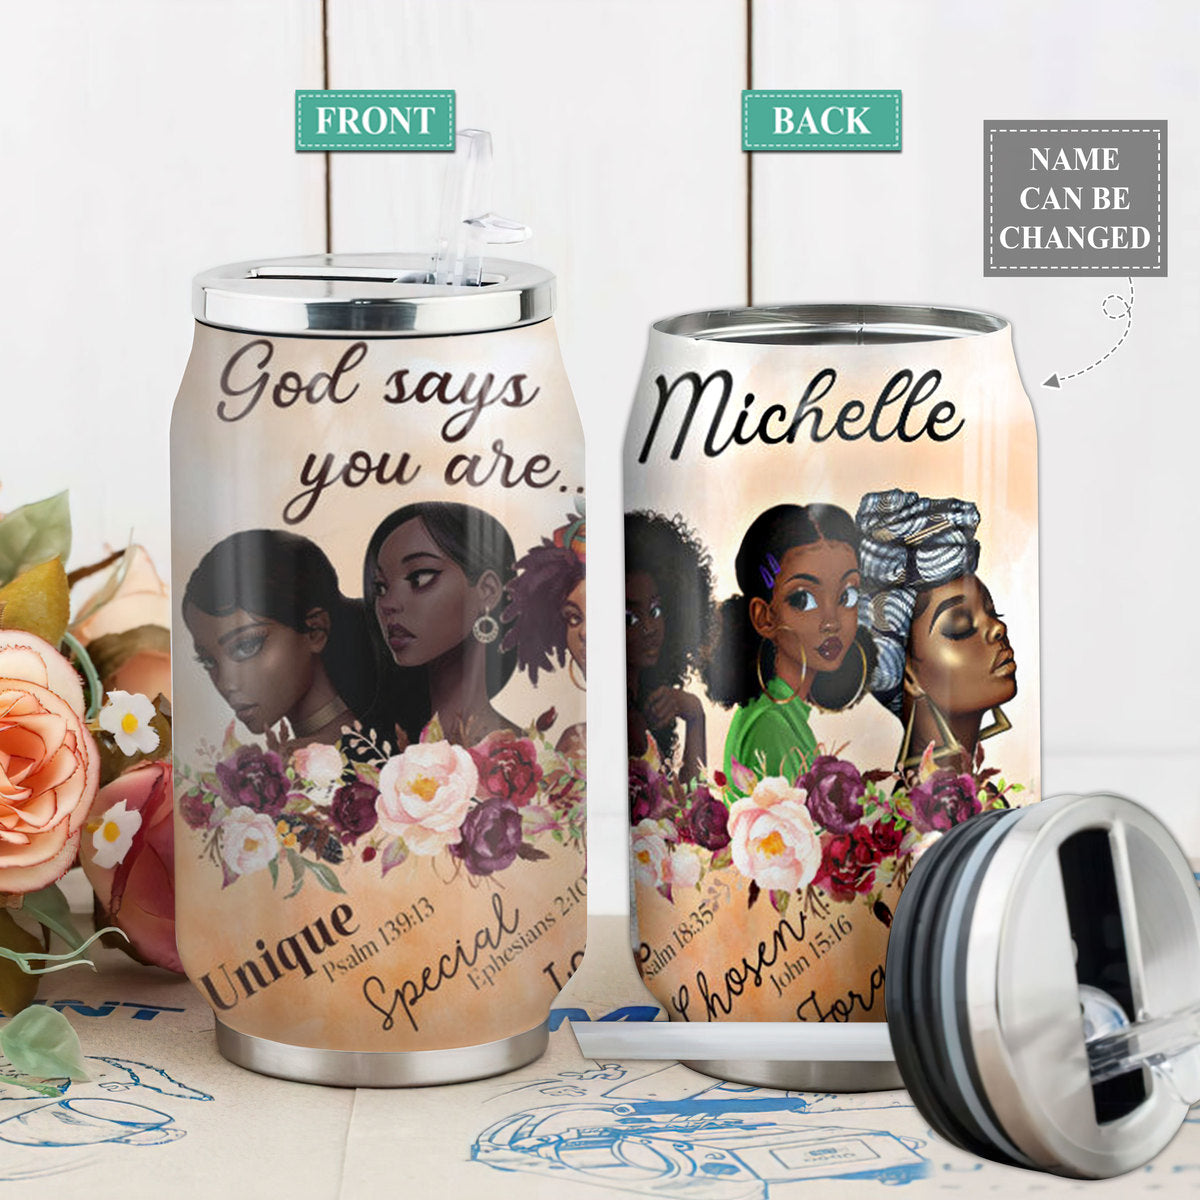 S Black Woman God Says You Are Personalized - Soda Can Tumbler - Owls Matrix LTD